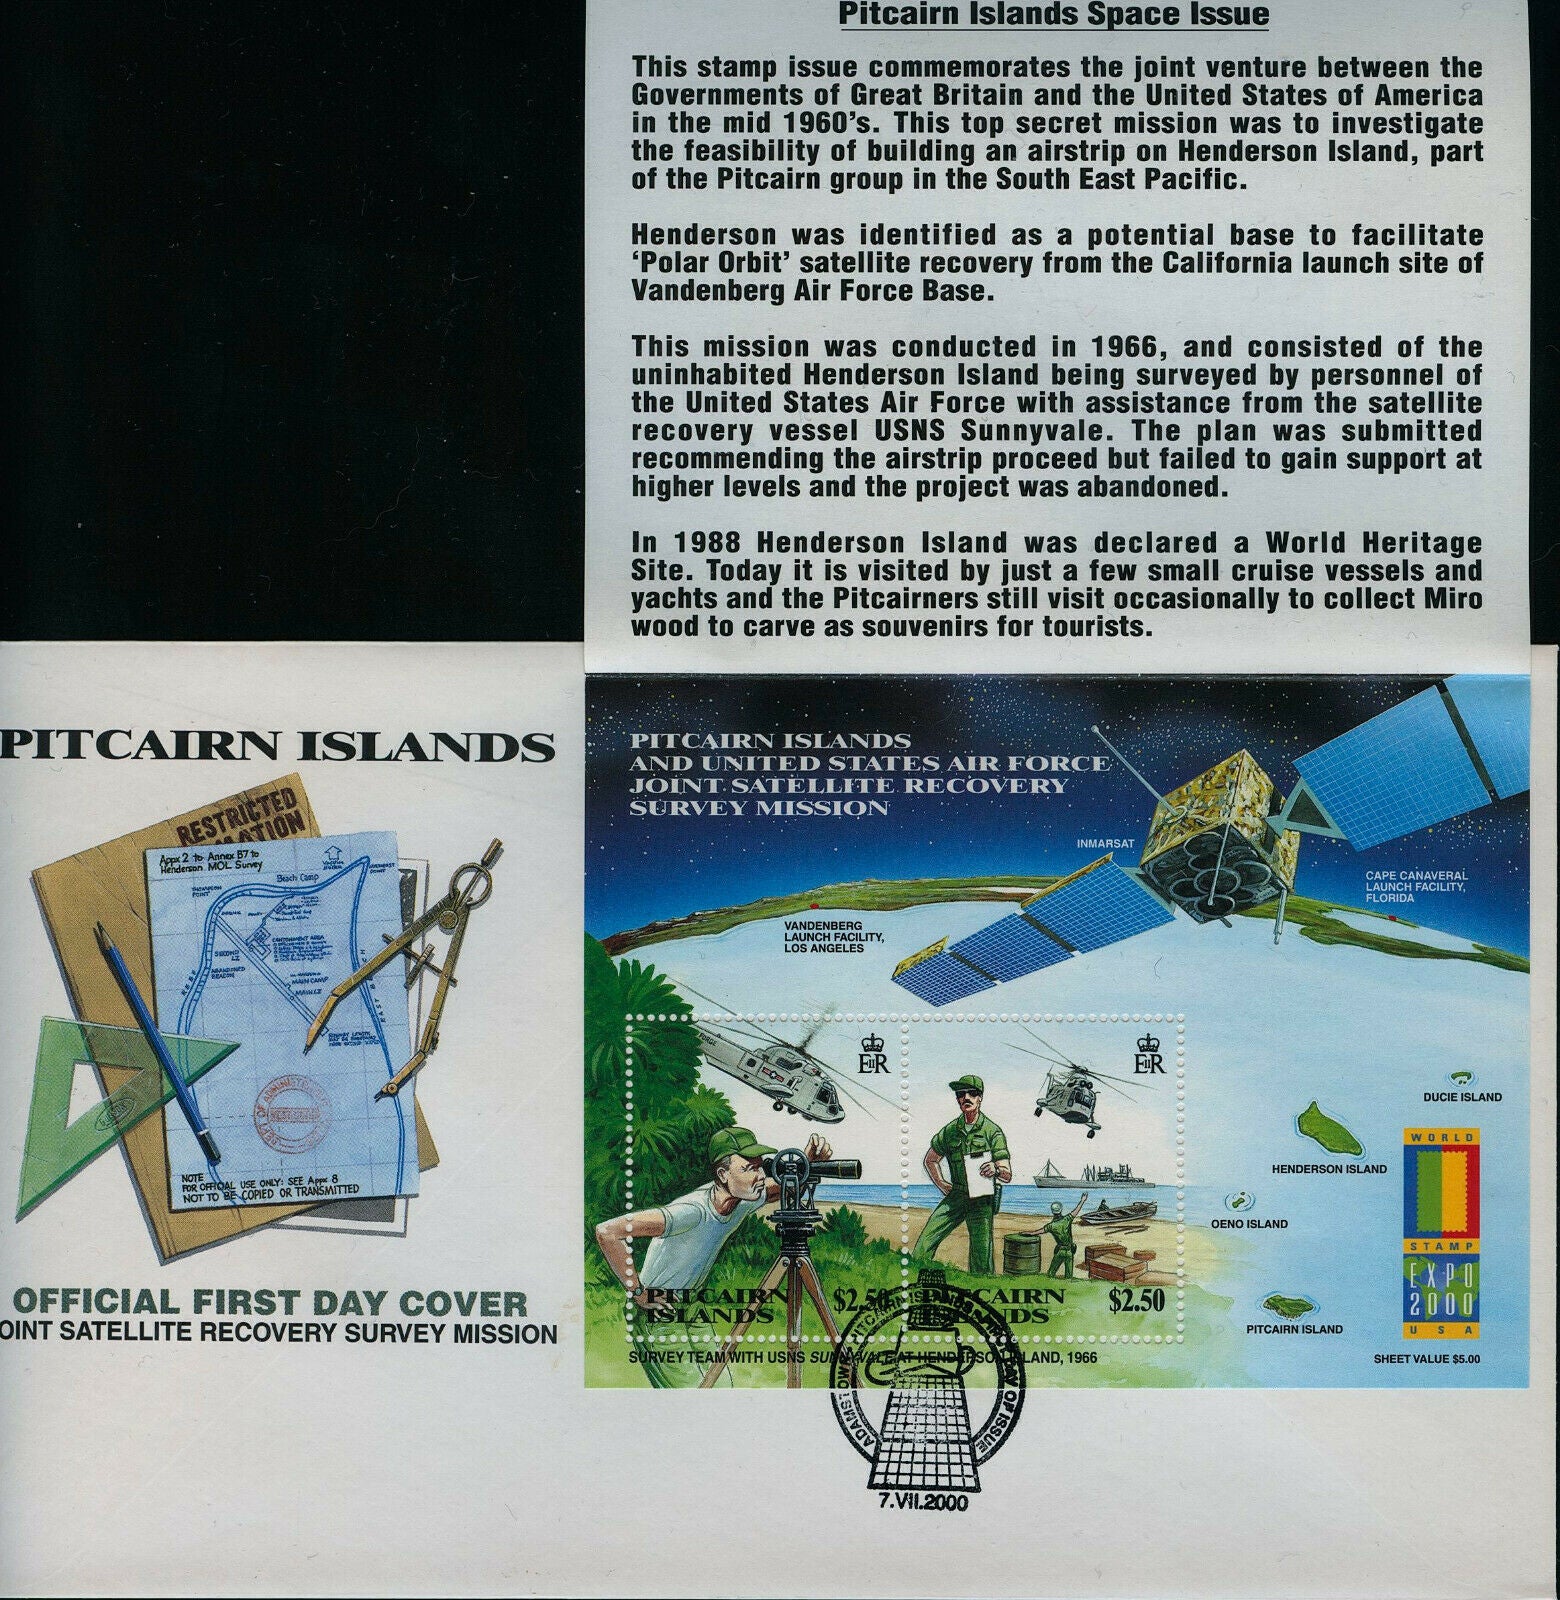 Pitcairn Islands 2000 FDC Stamps Joint Satellite Recovery Survey Mission 2v M/S